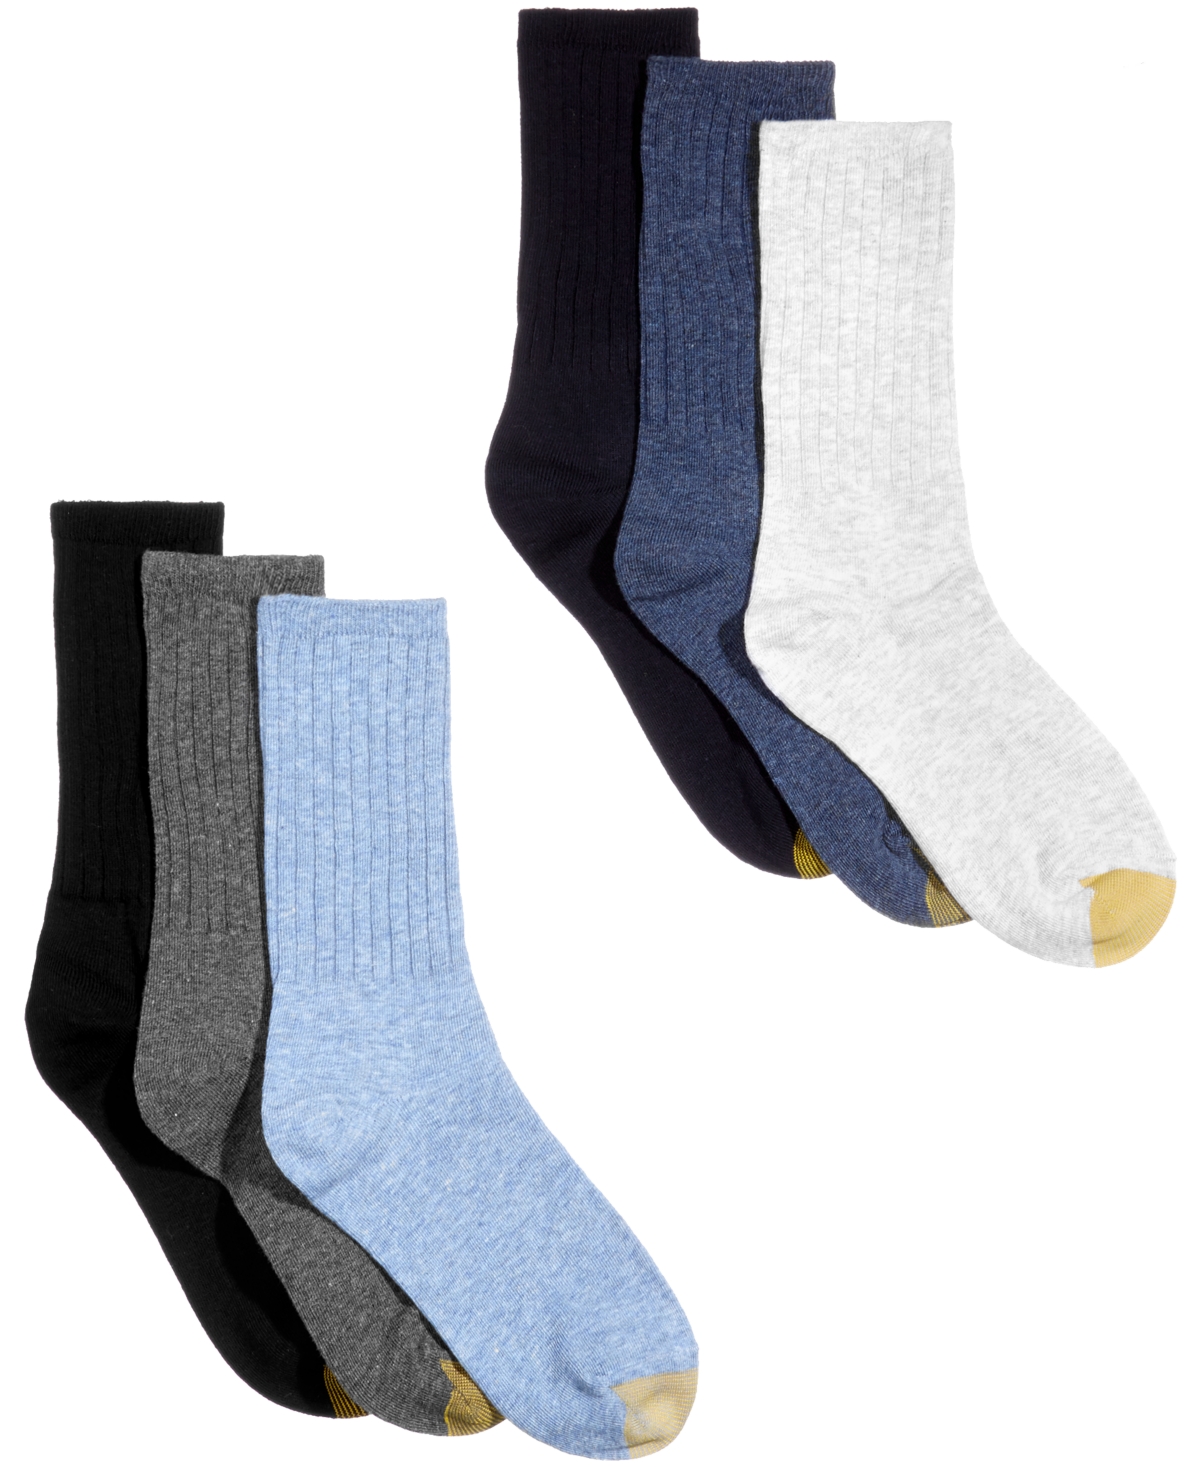 Women's 6-Pack Casual Ribbed Crew Socks - Black/Grey Assorted